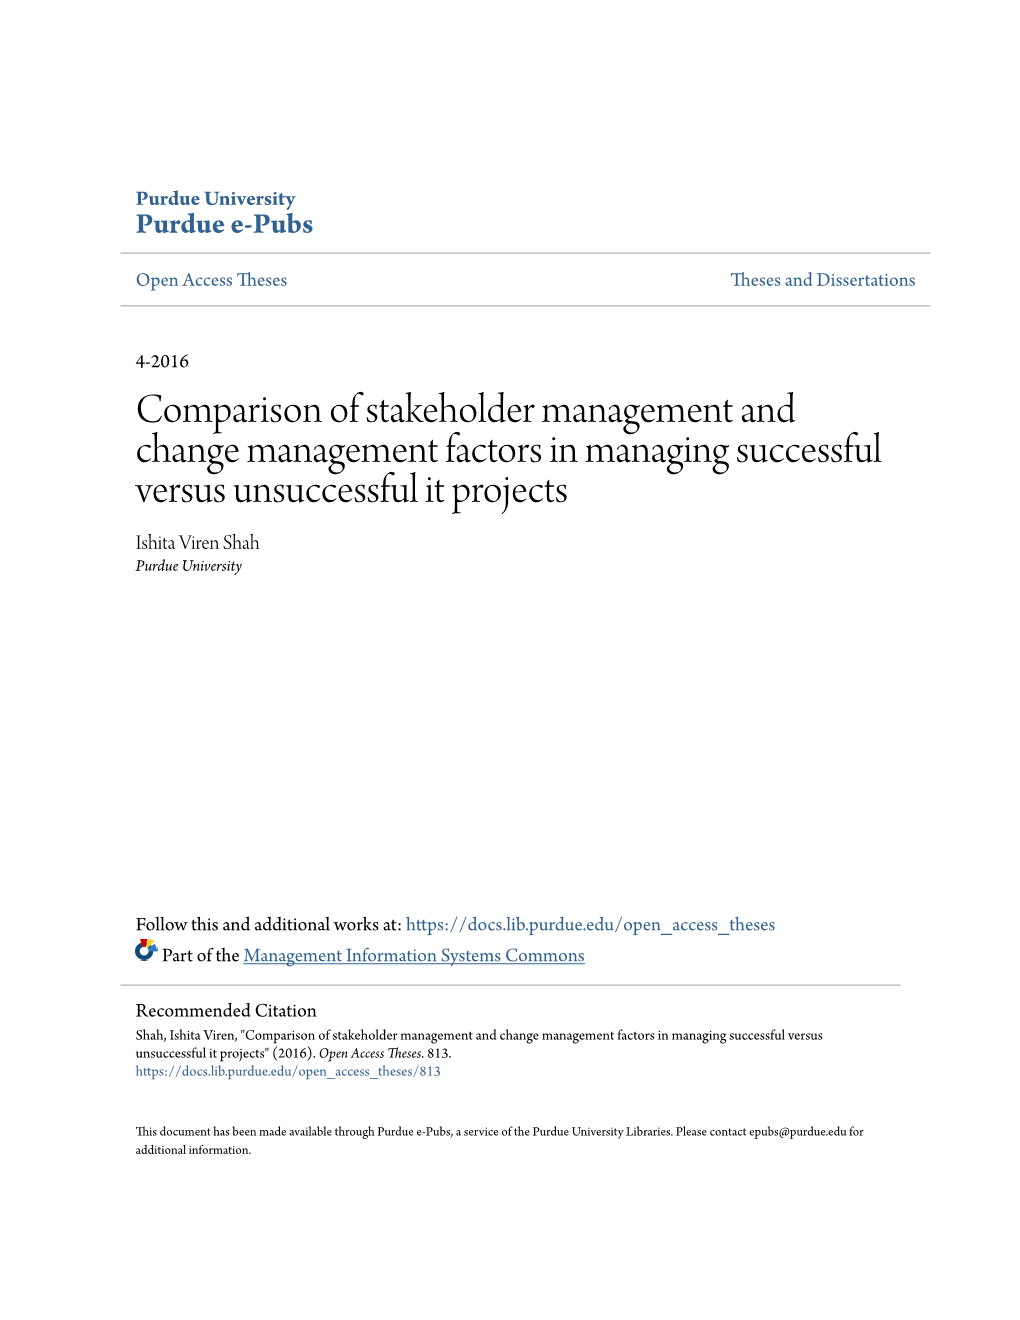 Comparison of Stakeholder Management and Change Management Factors in Managing Successful Versus Unsuccessful It Projects Ishita Viren Shah Purdue University